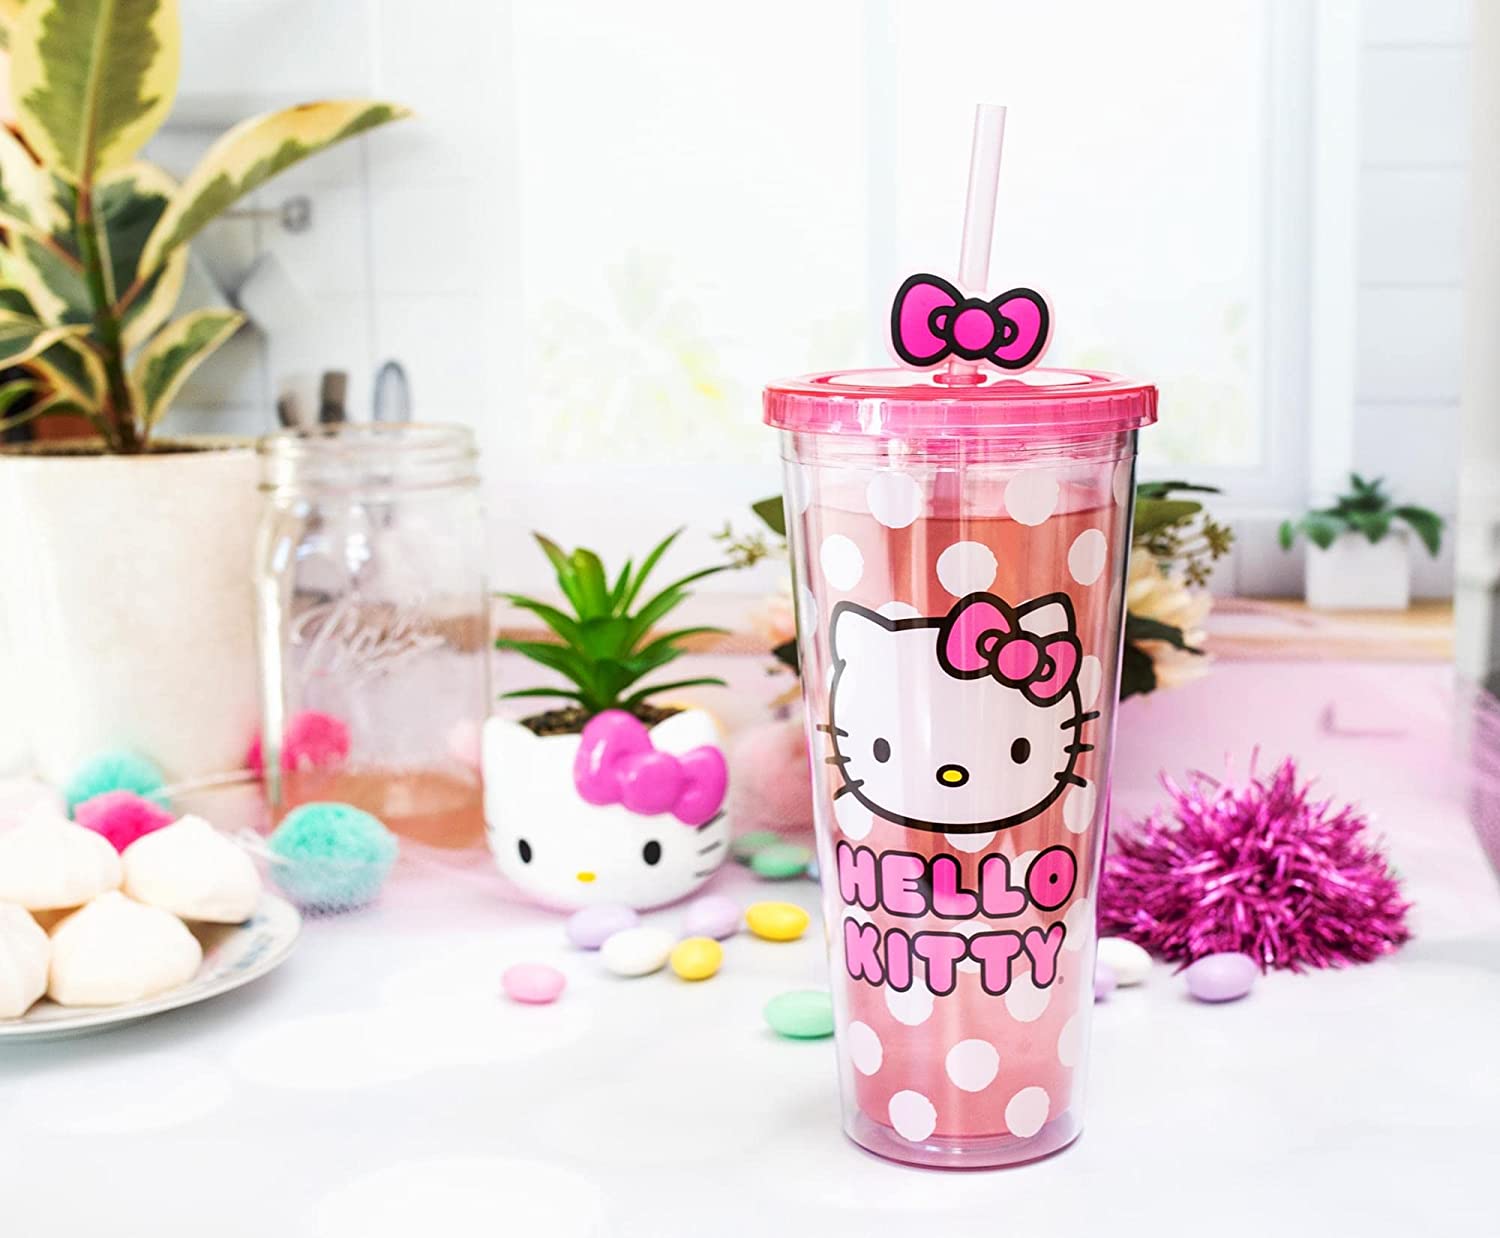 Hello Kitty By Sanrio White & Pink Stainless Steel Double Wall Tumbler w/Lid